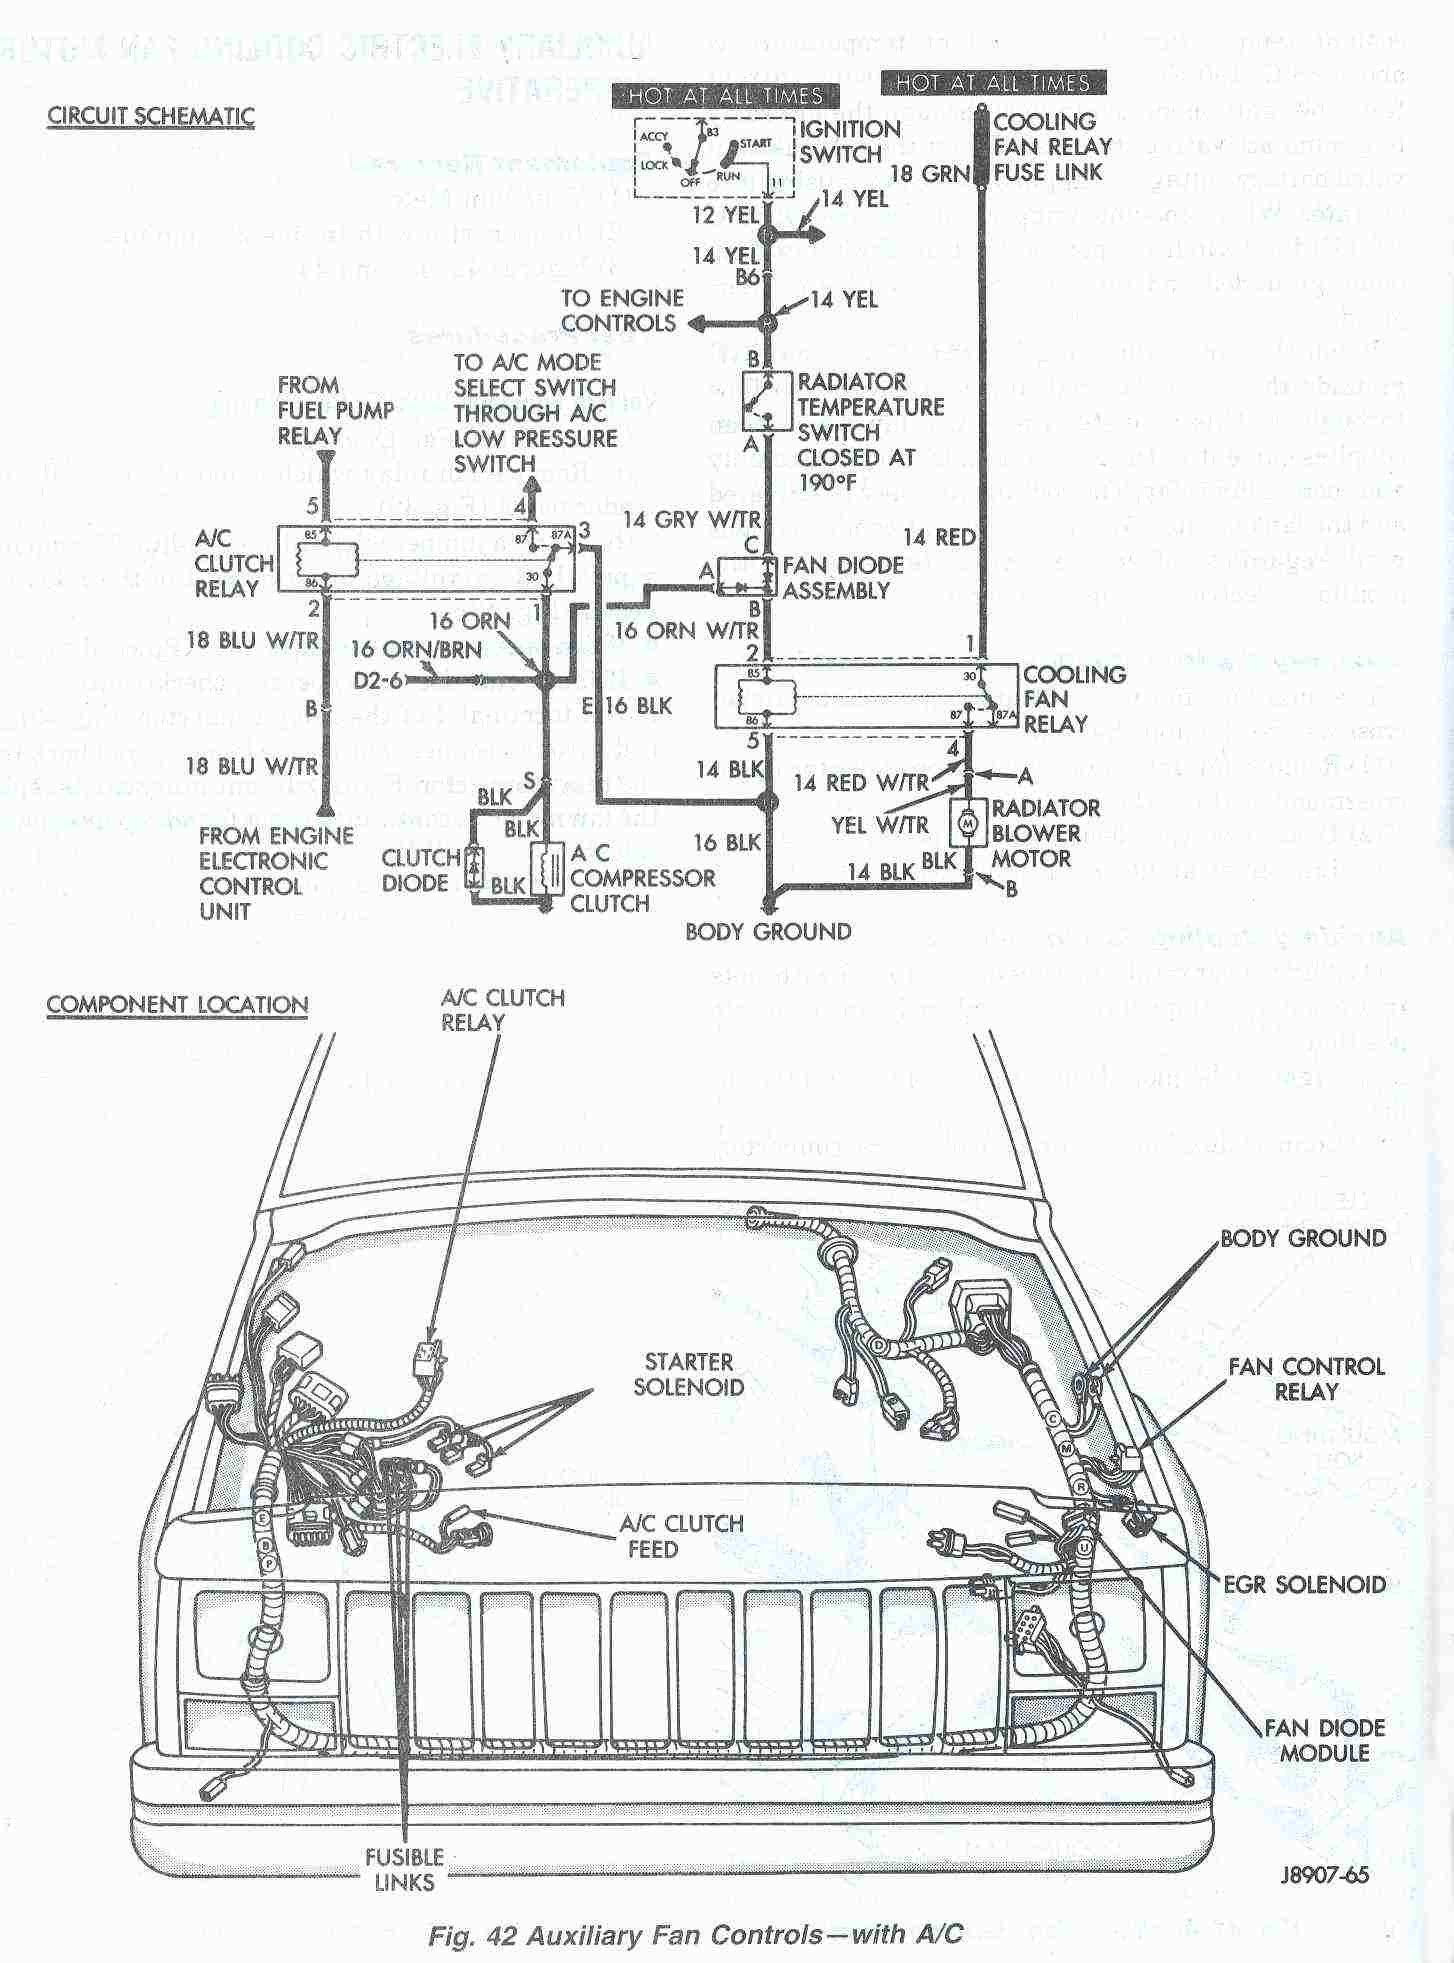 Jeep Wrangler Engine Diagram Wiring Diagram for Ac Unit thermostat Along with Jeep Cherokee Of Jeep Wrangler Engine Diagram